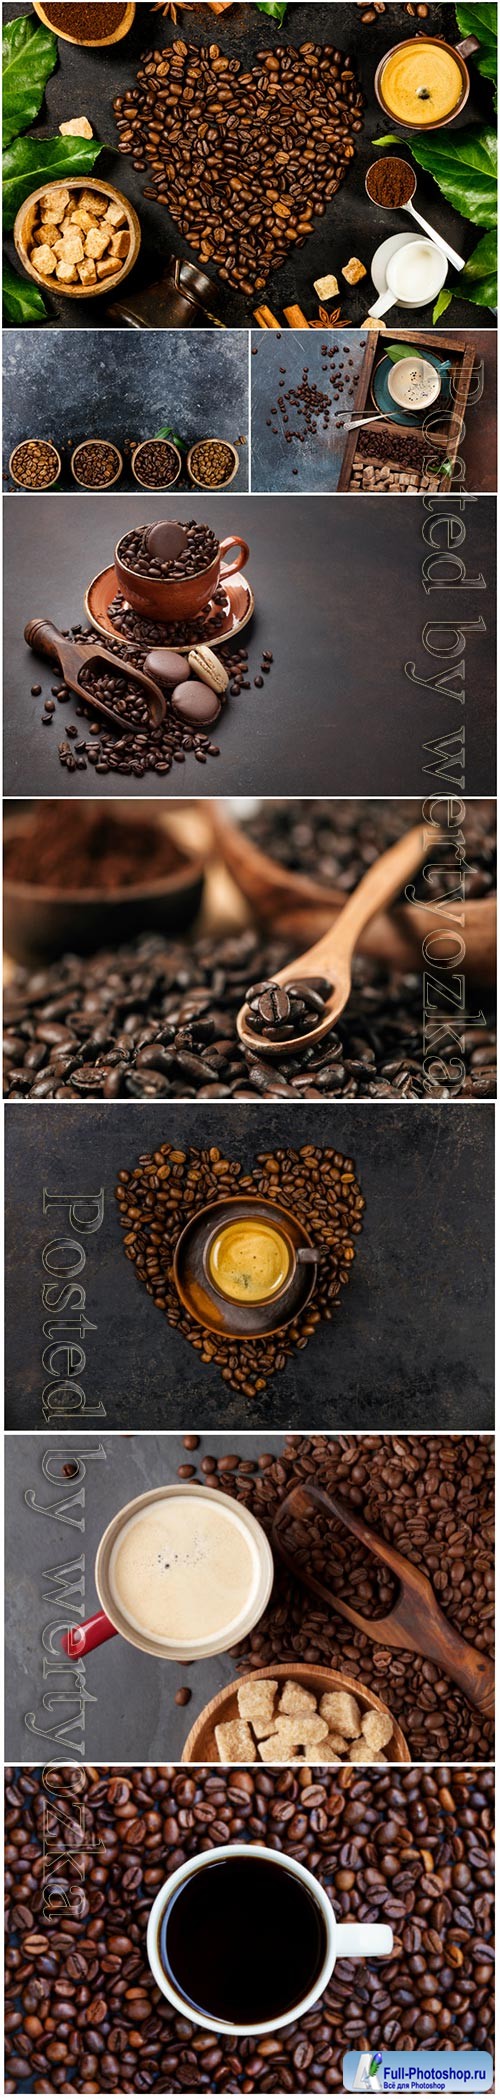 Coffee and coffee beans stock photo